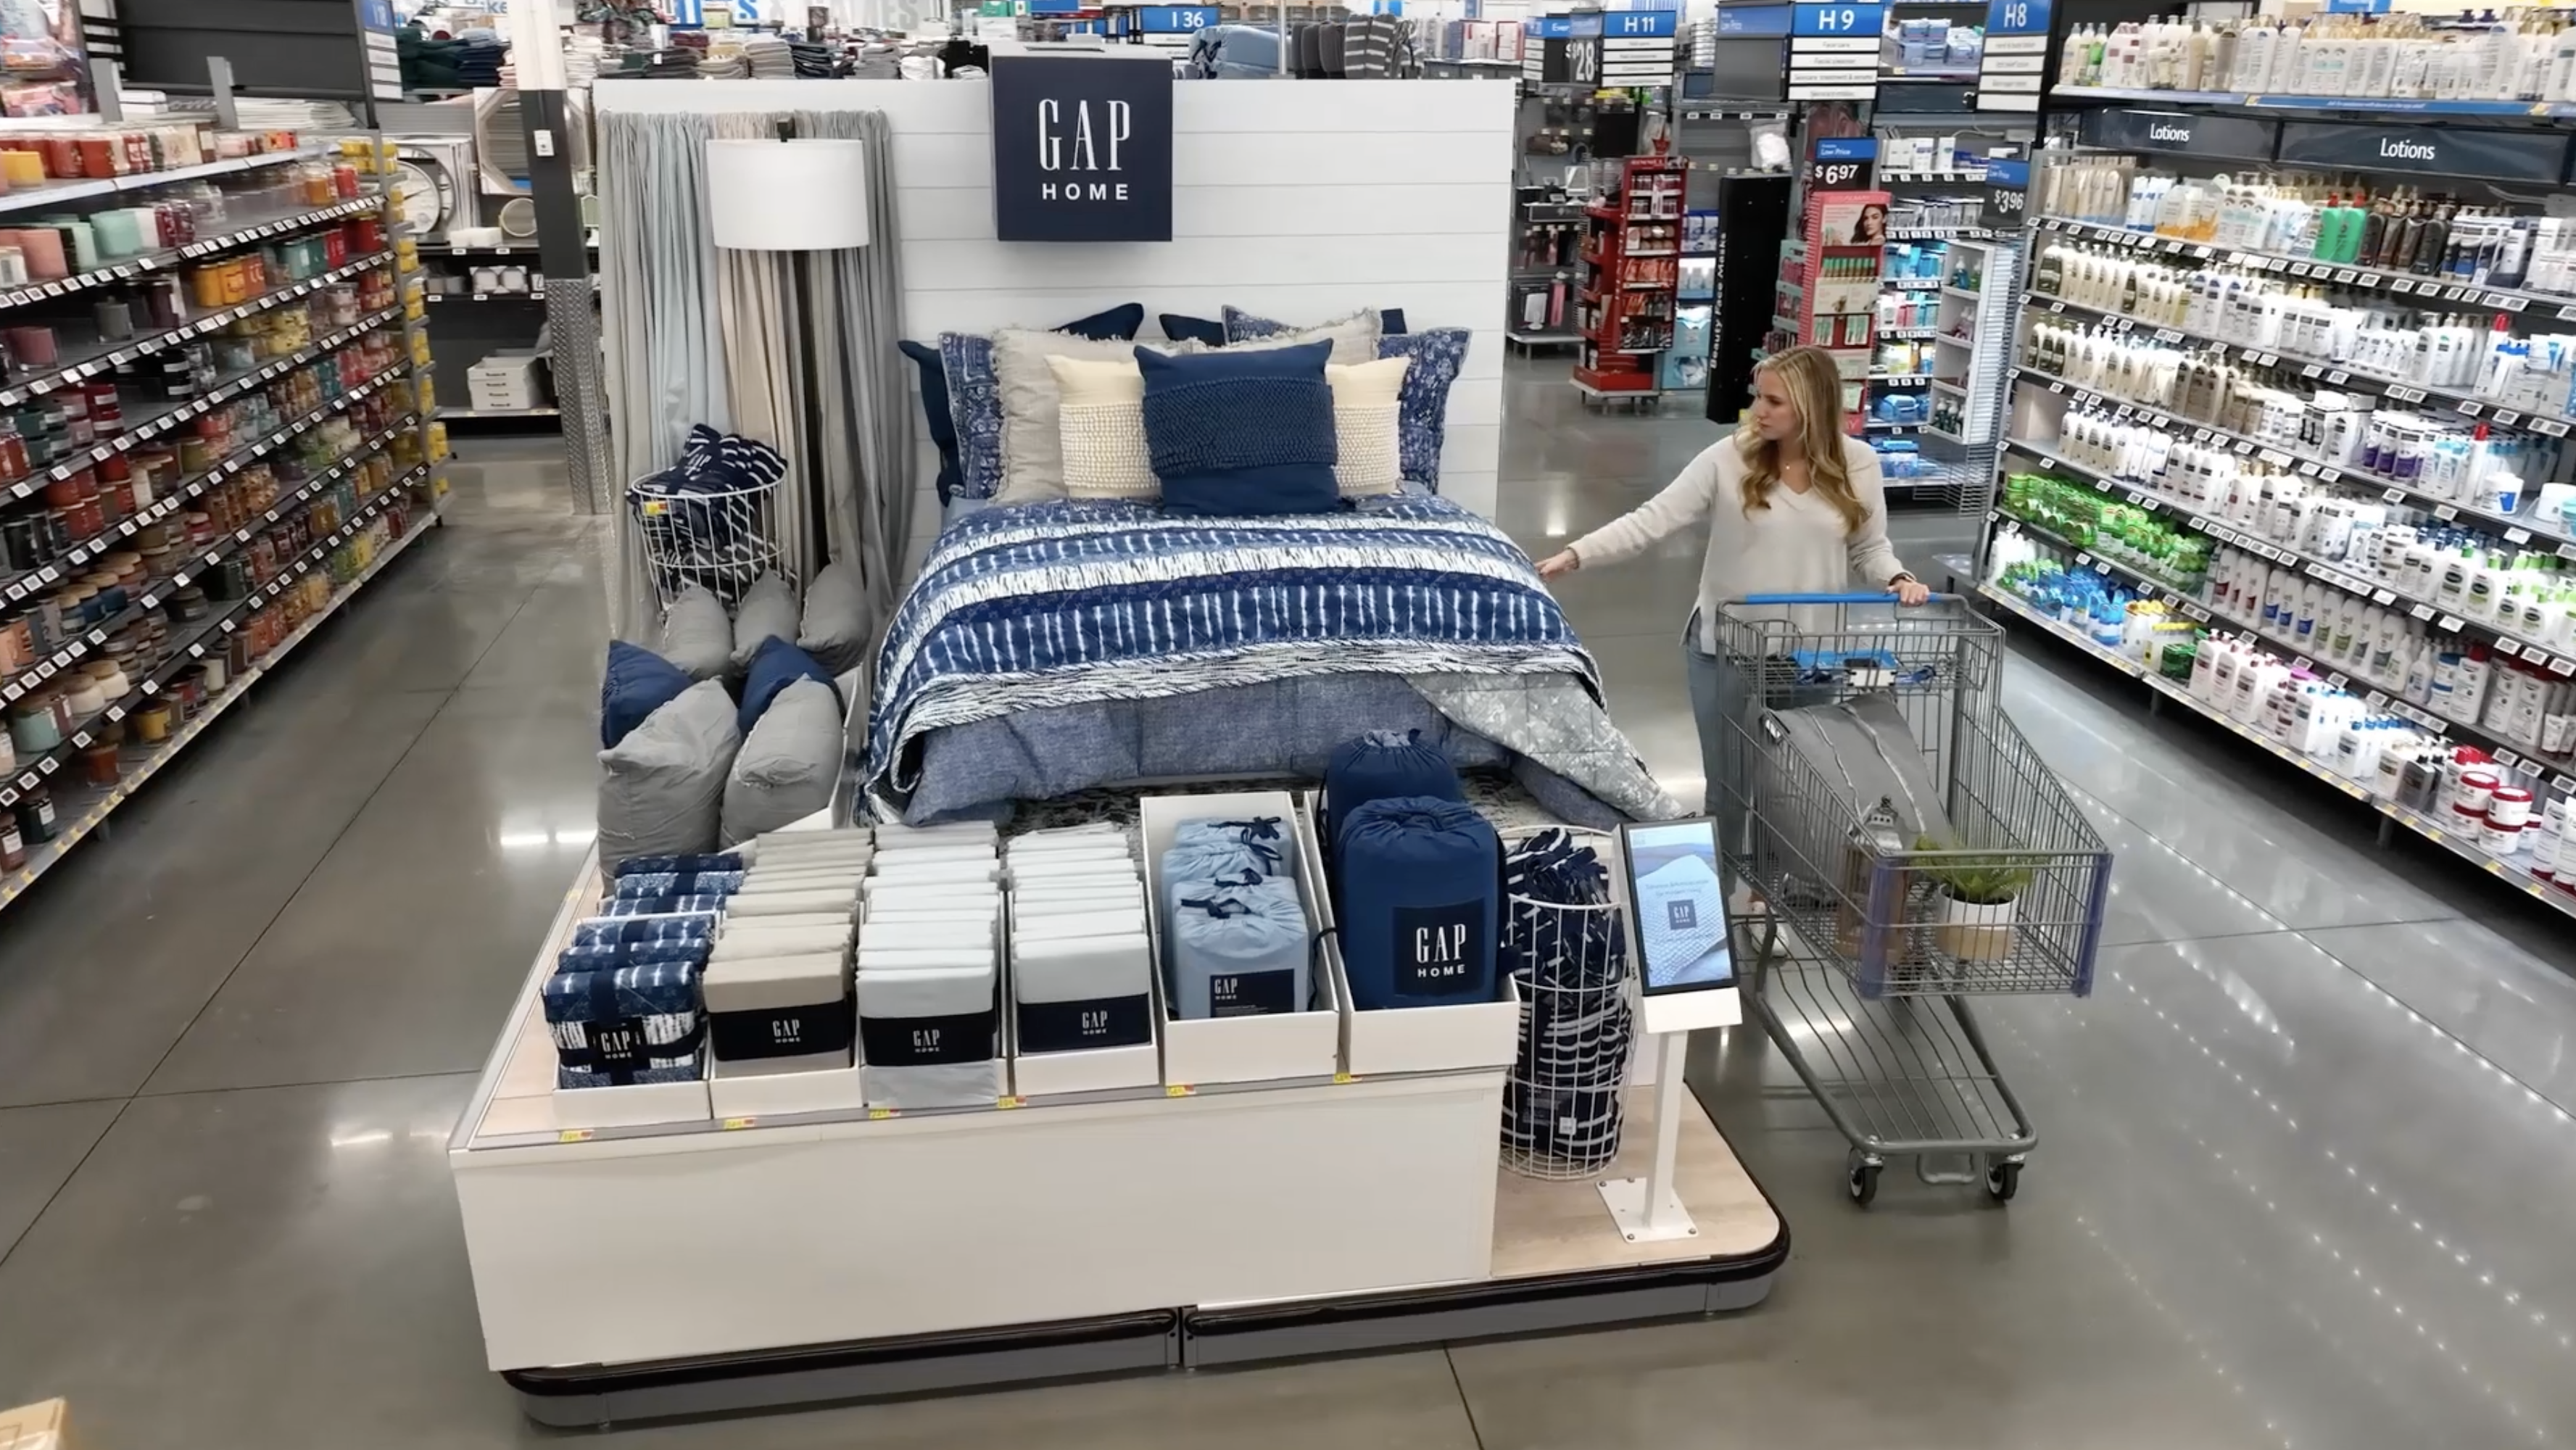 Walmart is rolling out sleek new store designs